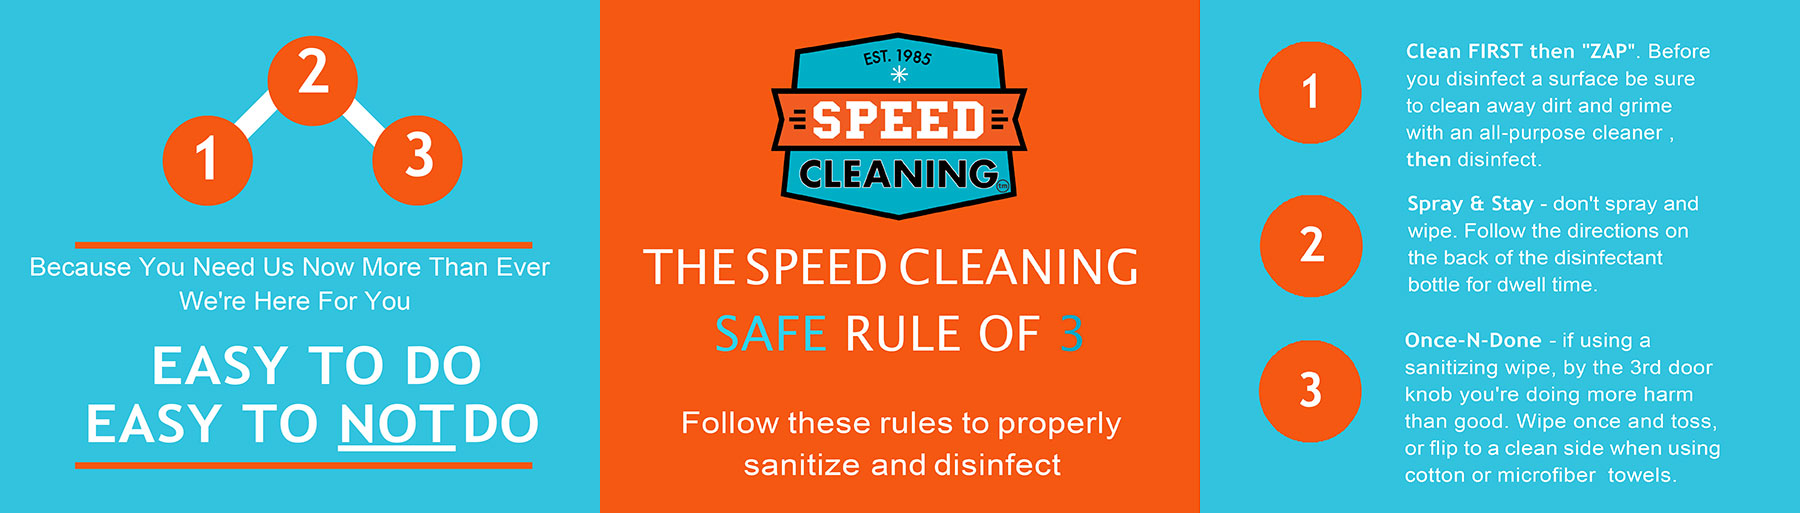 Speed Cleaning Safe Rule of 3